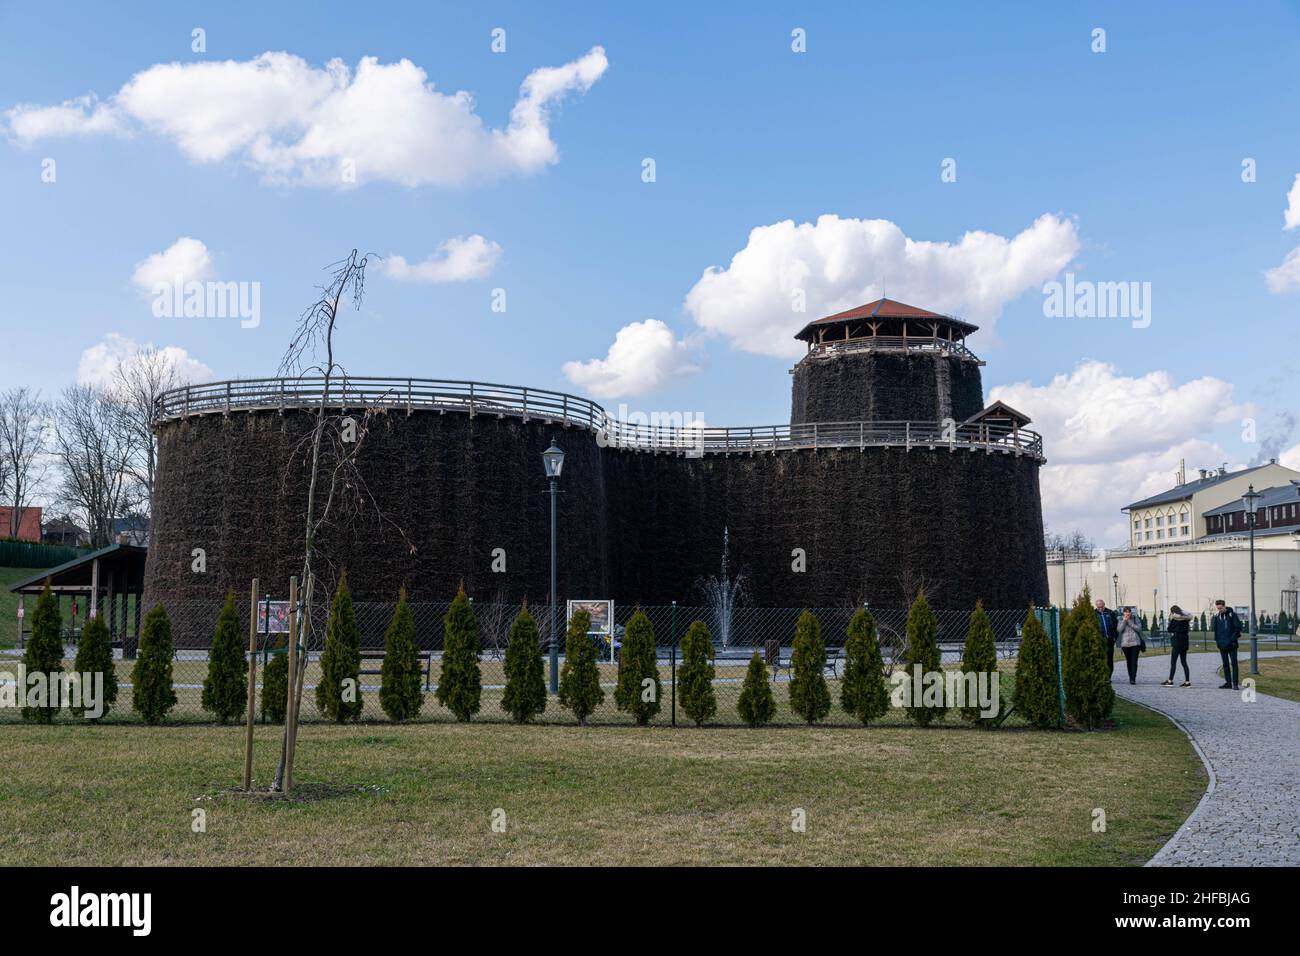 Cracow, Poland - 12th March 2020: Graduation tower at Wieliczka Salt Mine, used to produce salt by removing water from a saline solution by evaporatio Stock Photo